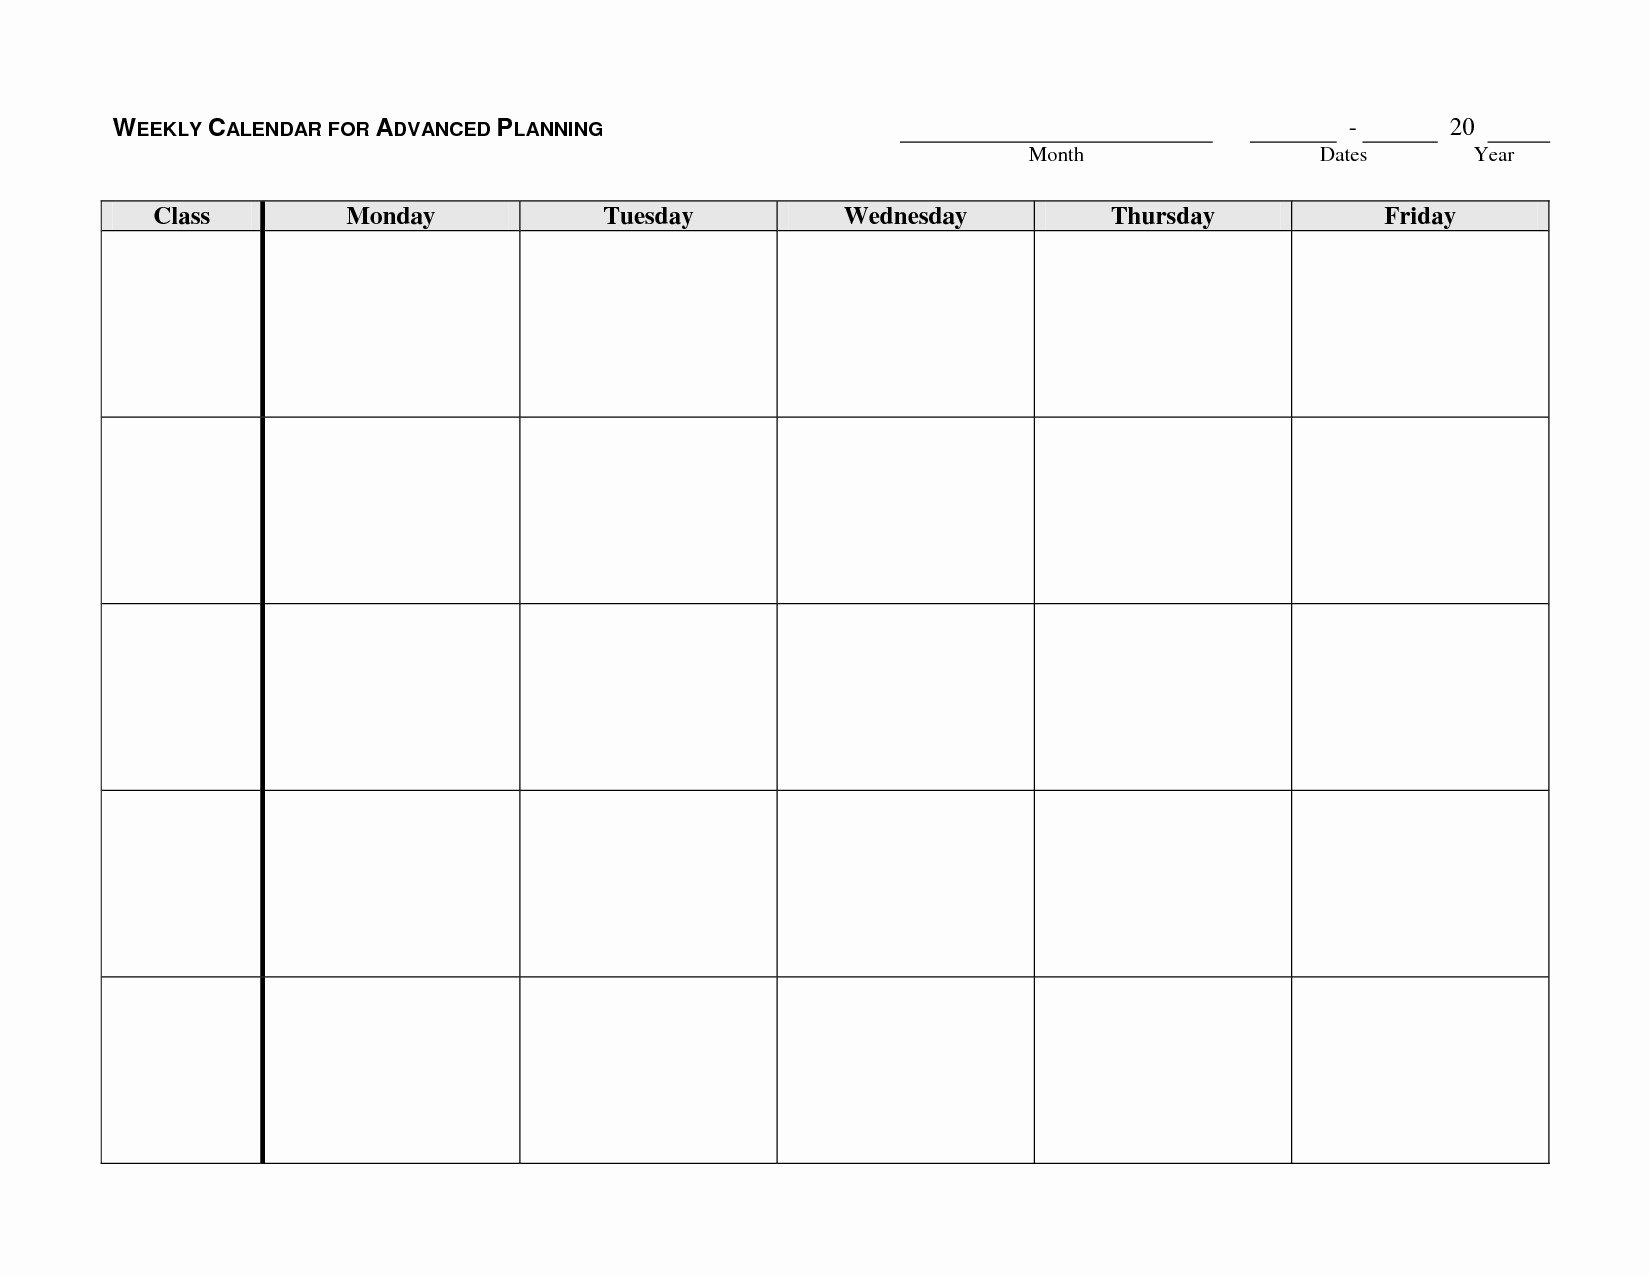 Monday to Friday Schedule Template Luxury Blank Monthly Calendar Monday Through Friday 2018